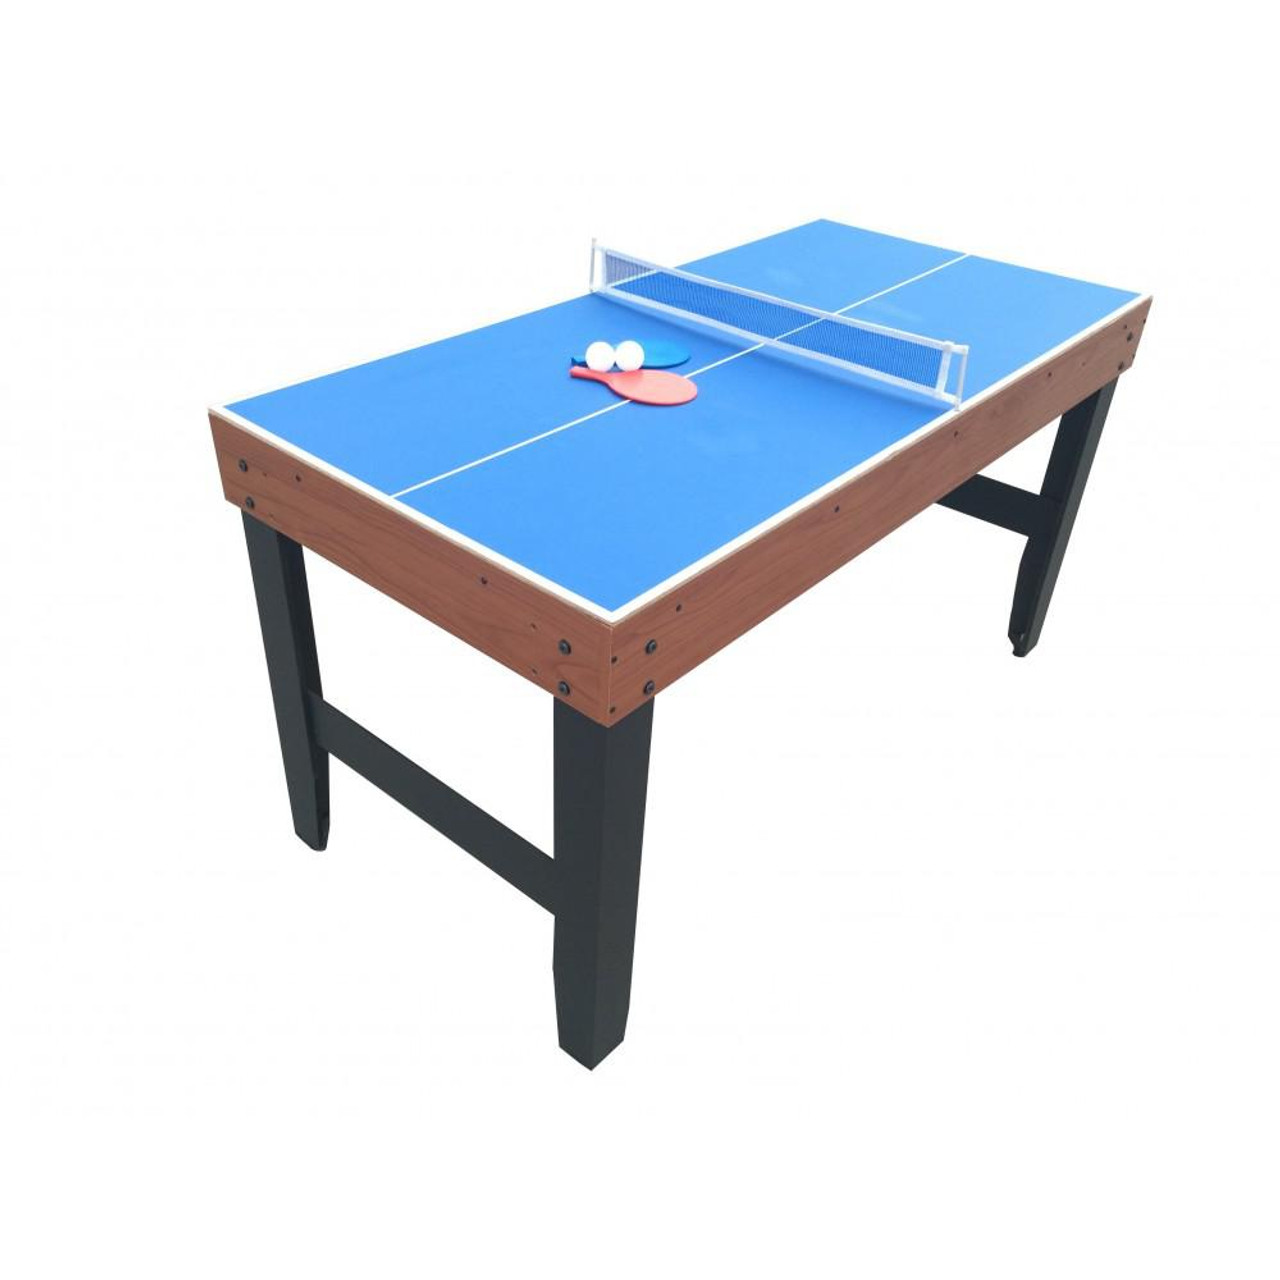 NG1016M, Accelerator, 4 in 1, Multi, Game, Table, Basketball, Air Hockey, Table Tennis, Ping Pong, Dry Erase Board, FREE SHIPPING, Hathaway, blue Wave